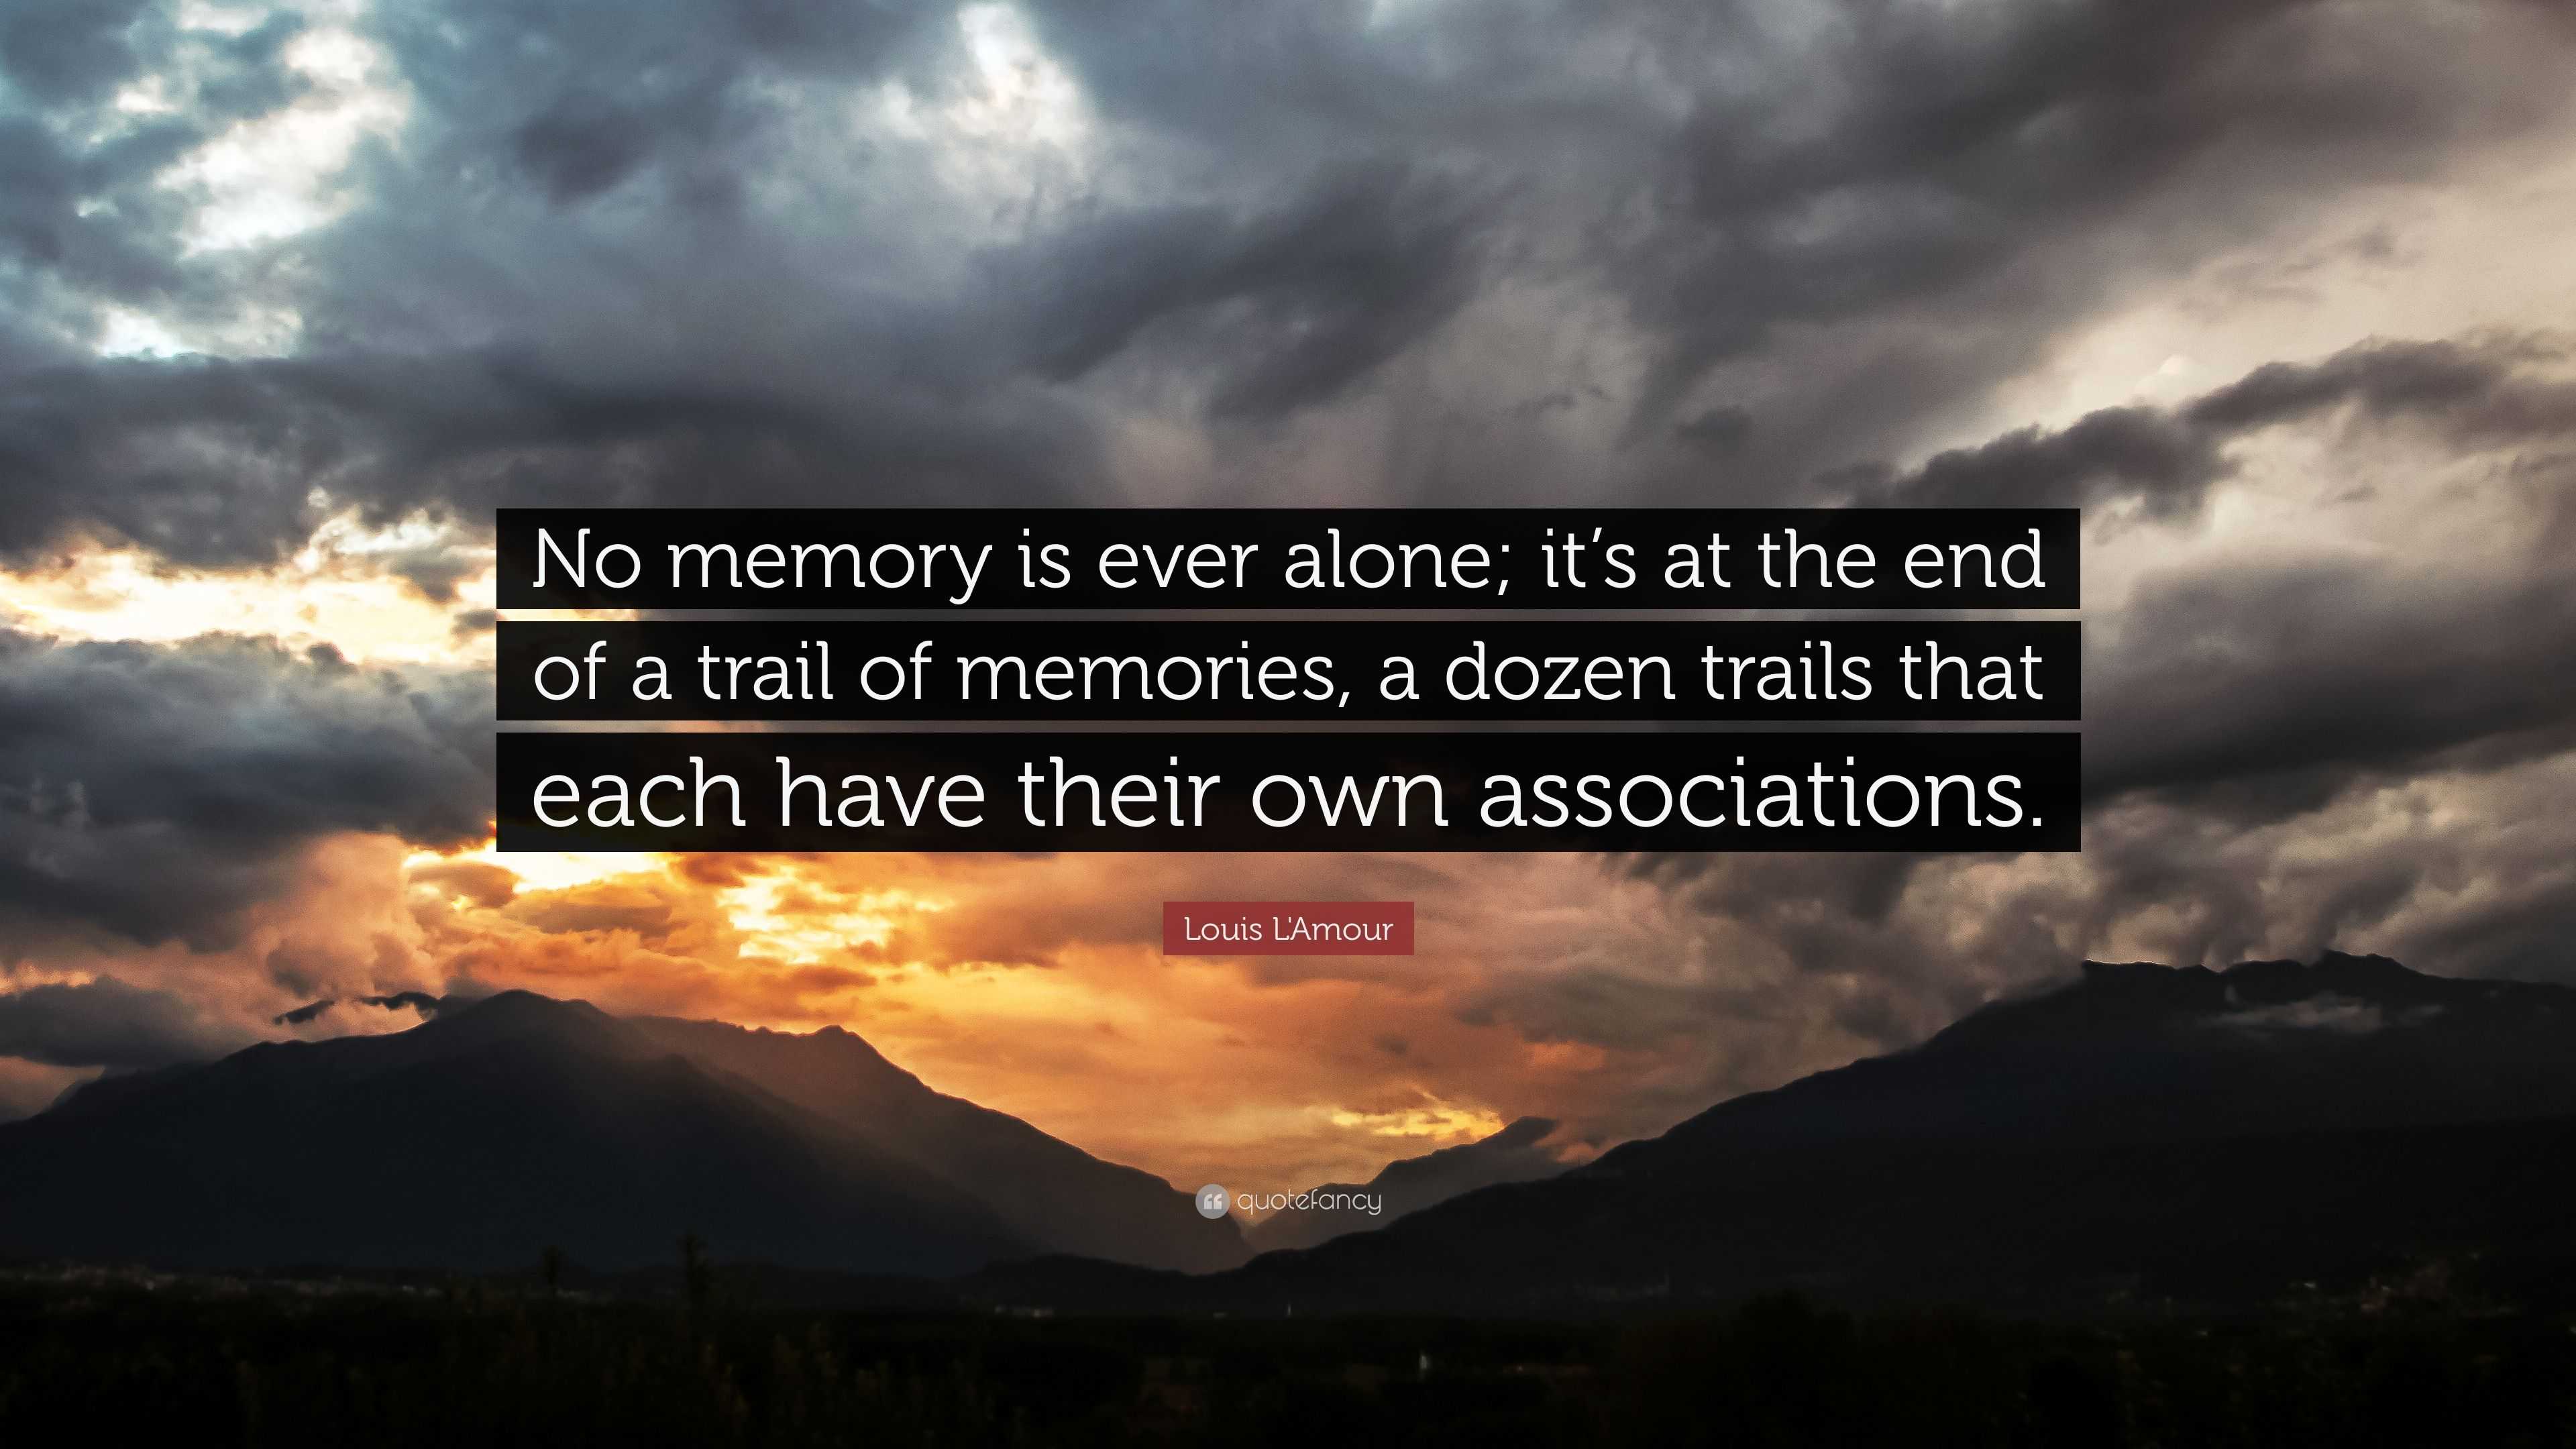 Louis L'Amour Quotes - No memory is ever alone, it's at the end of a trail  of memories, a dozen trails that each have their own associations. ~Echo  Sackett Book: Ride The